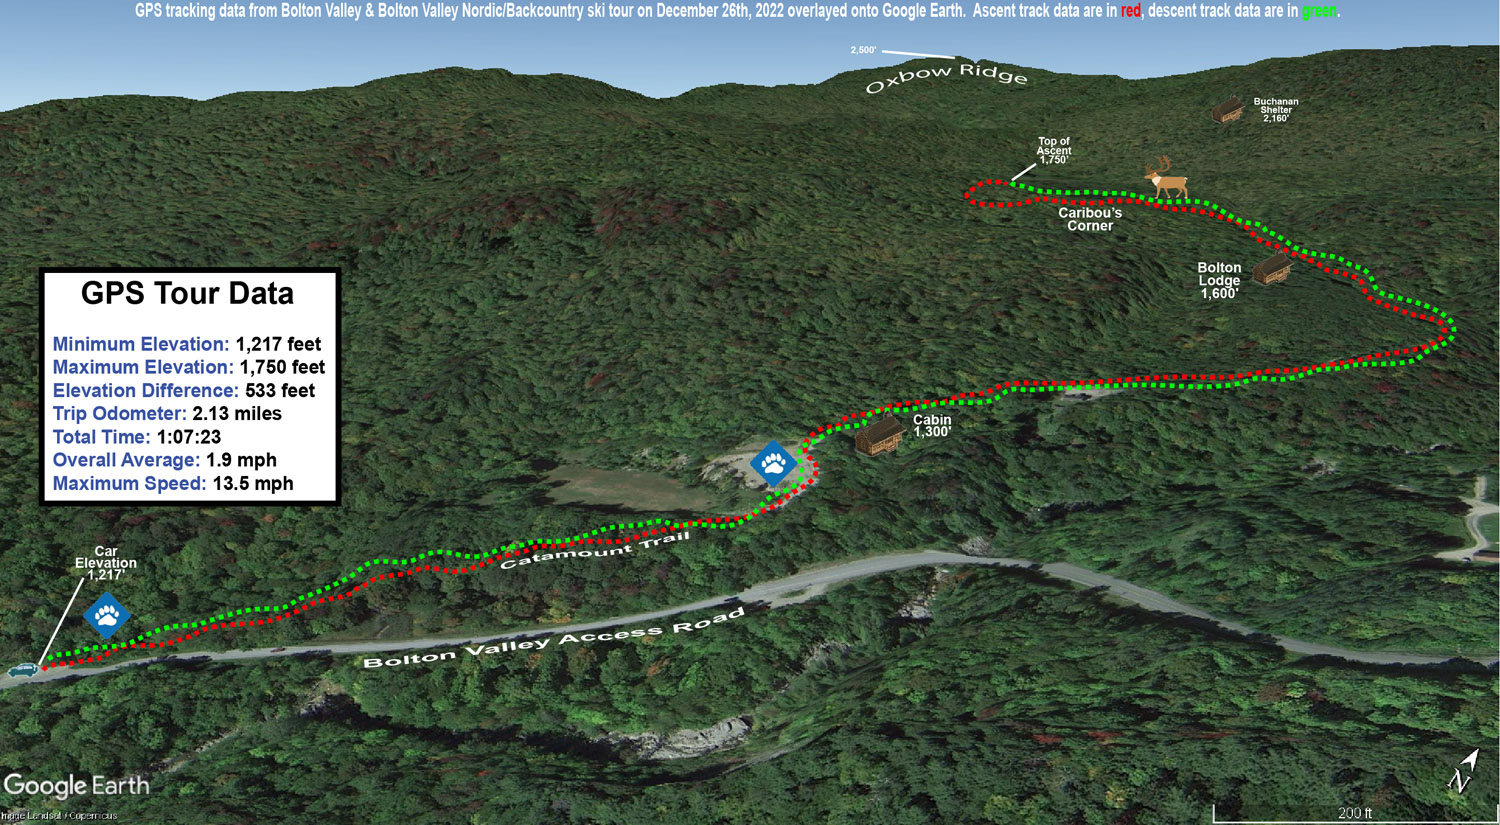 A Google Earth map with GPS tracking data of a ski tour on the Nordic and Backcountry Network at Bolton Valley Resort in Vermont